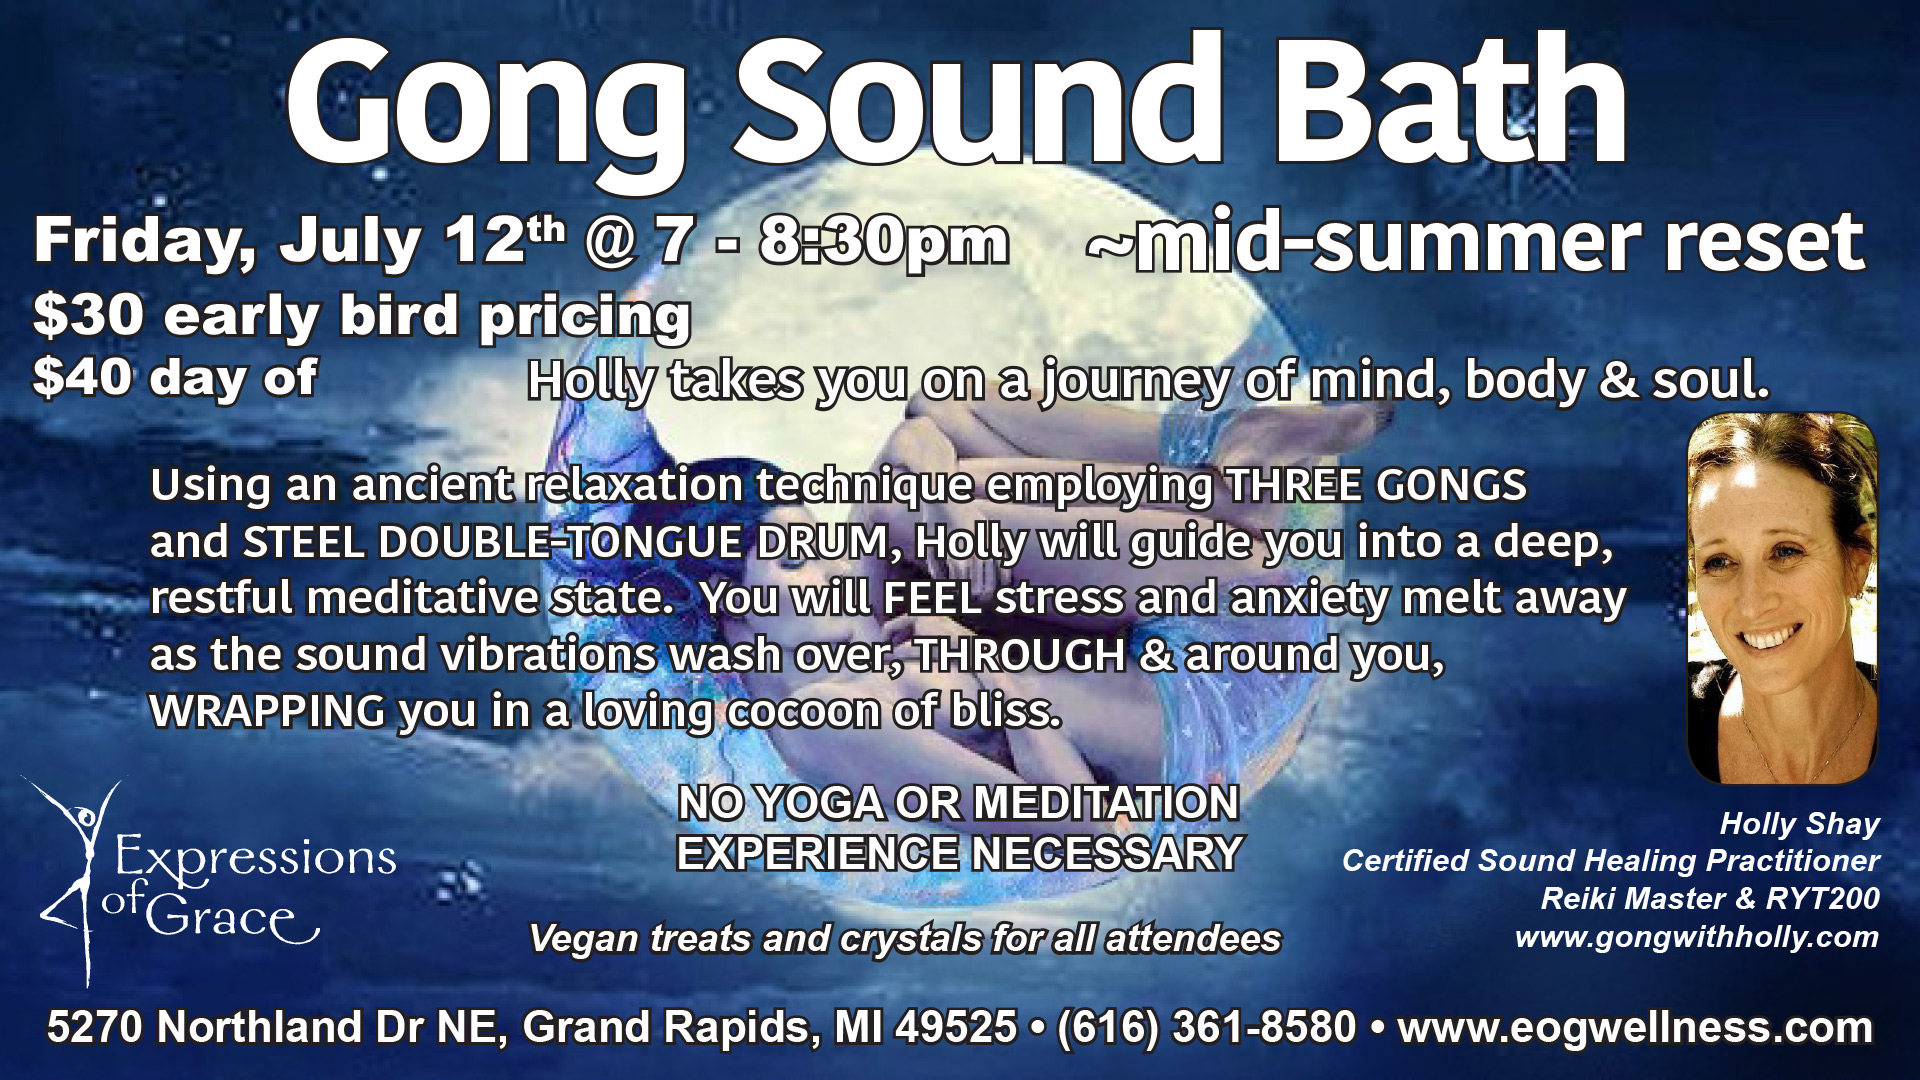 Gong Sound Bath, July 12, Expressions of Grace Yoga, Grand Rapids